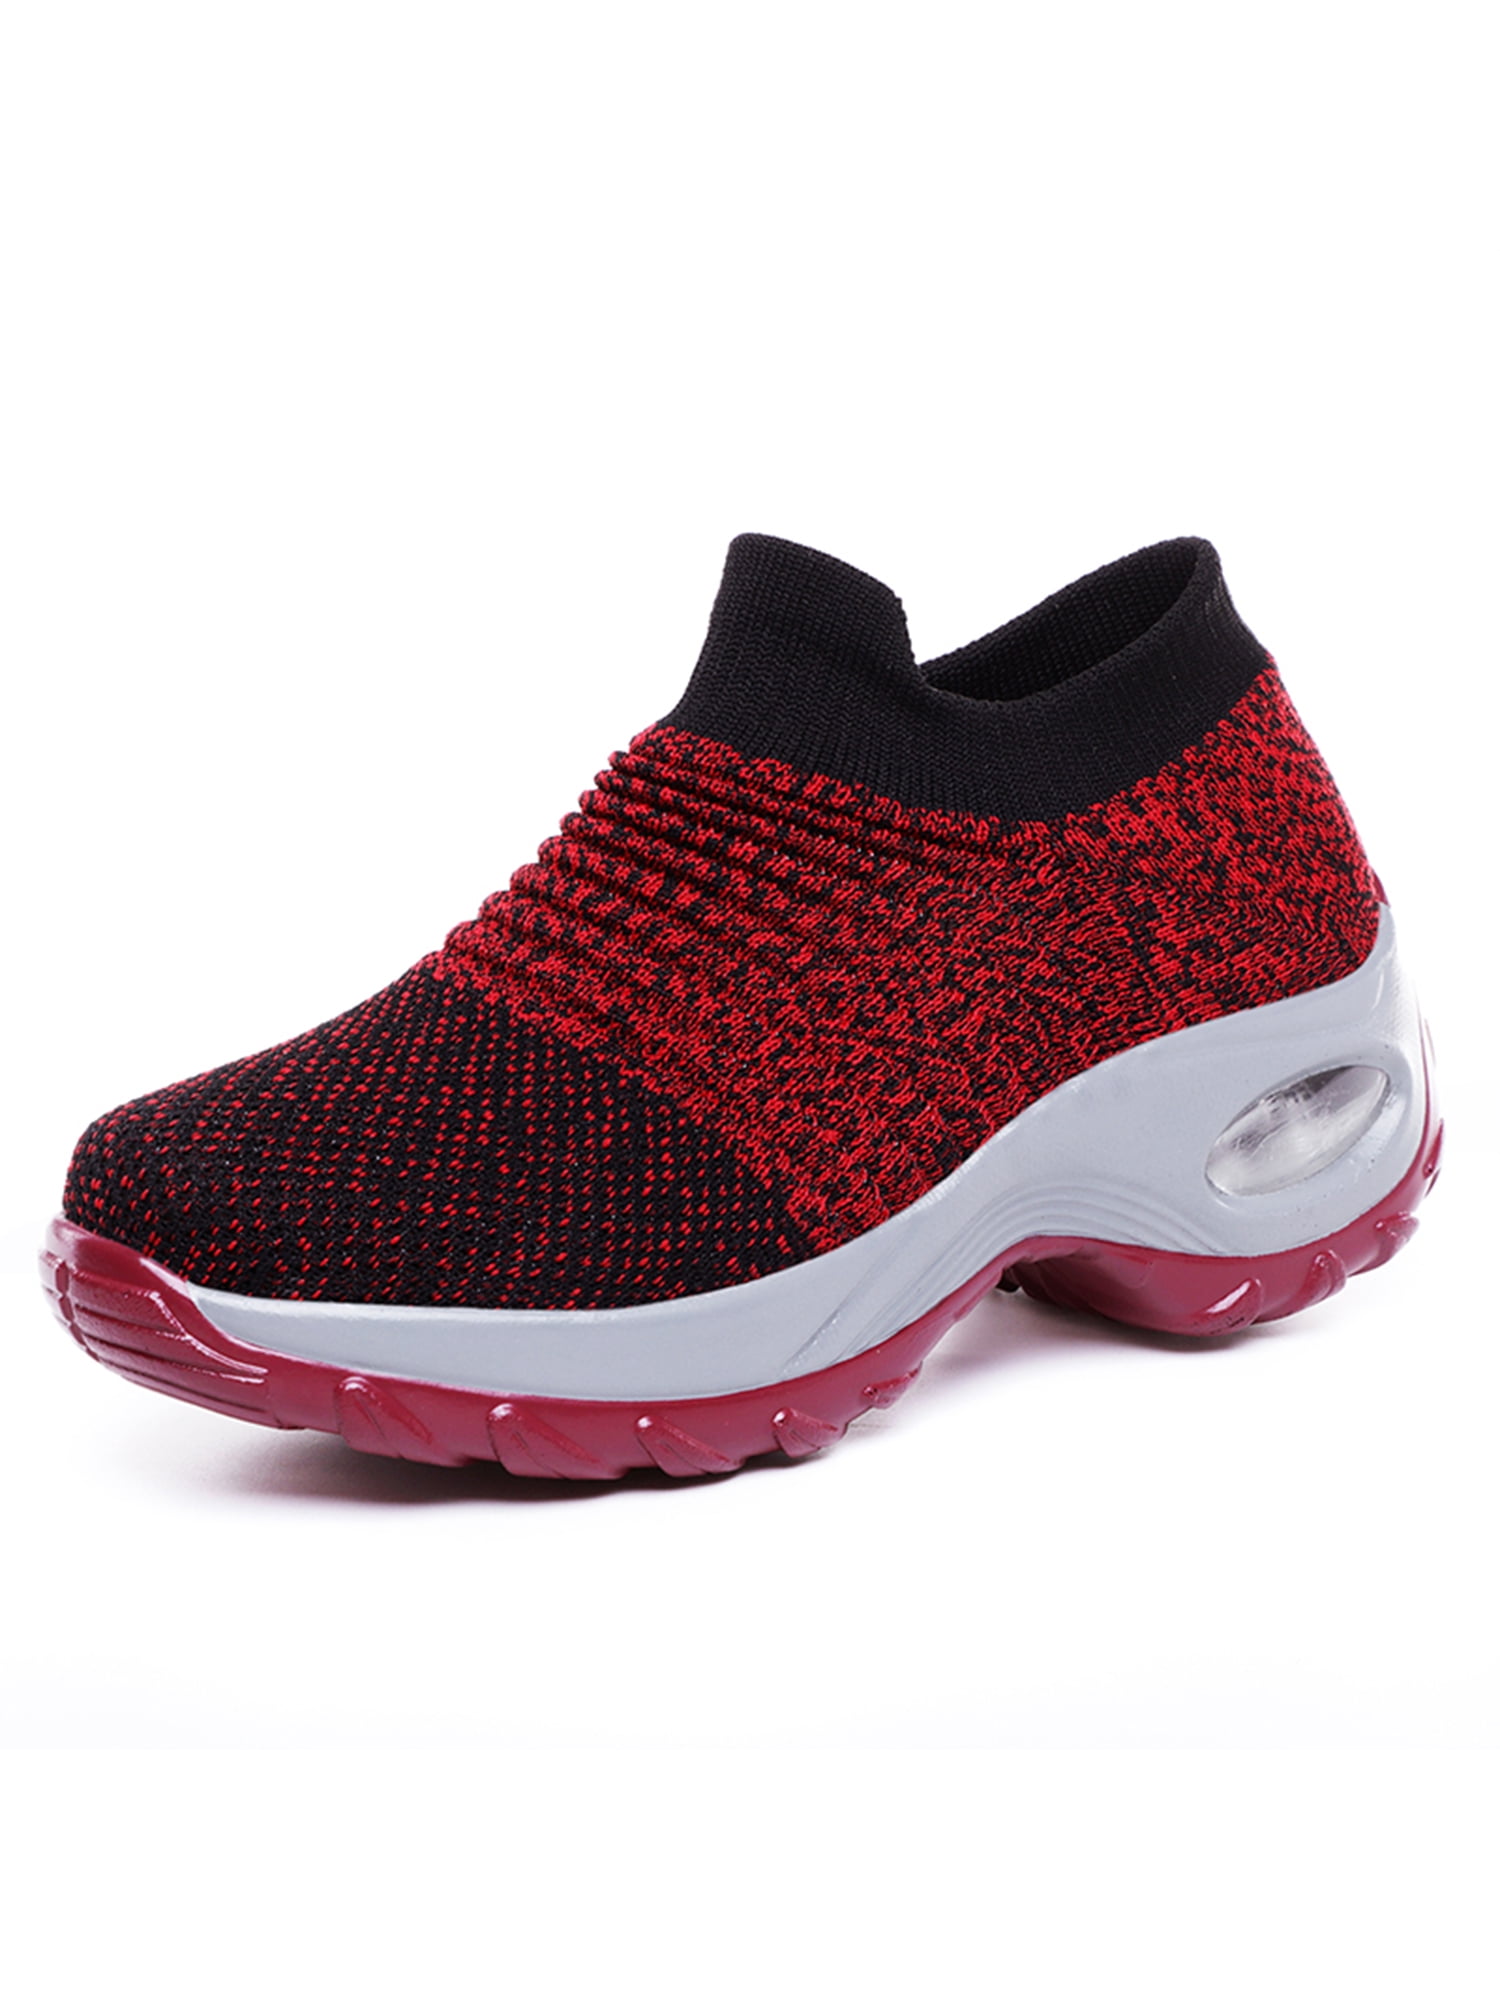 Women New Fashion Modern Dance Jazz Athletic Sneakers Net Mesh Breathable Shoes 